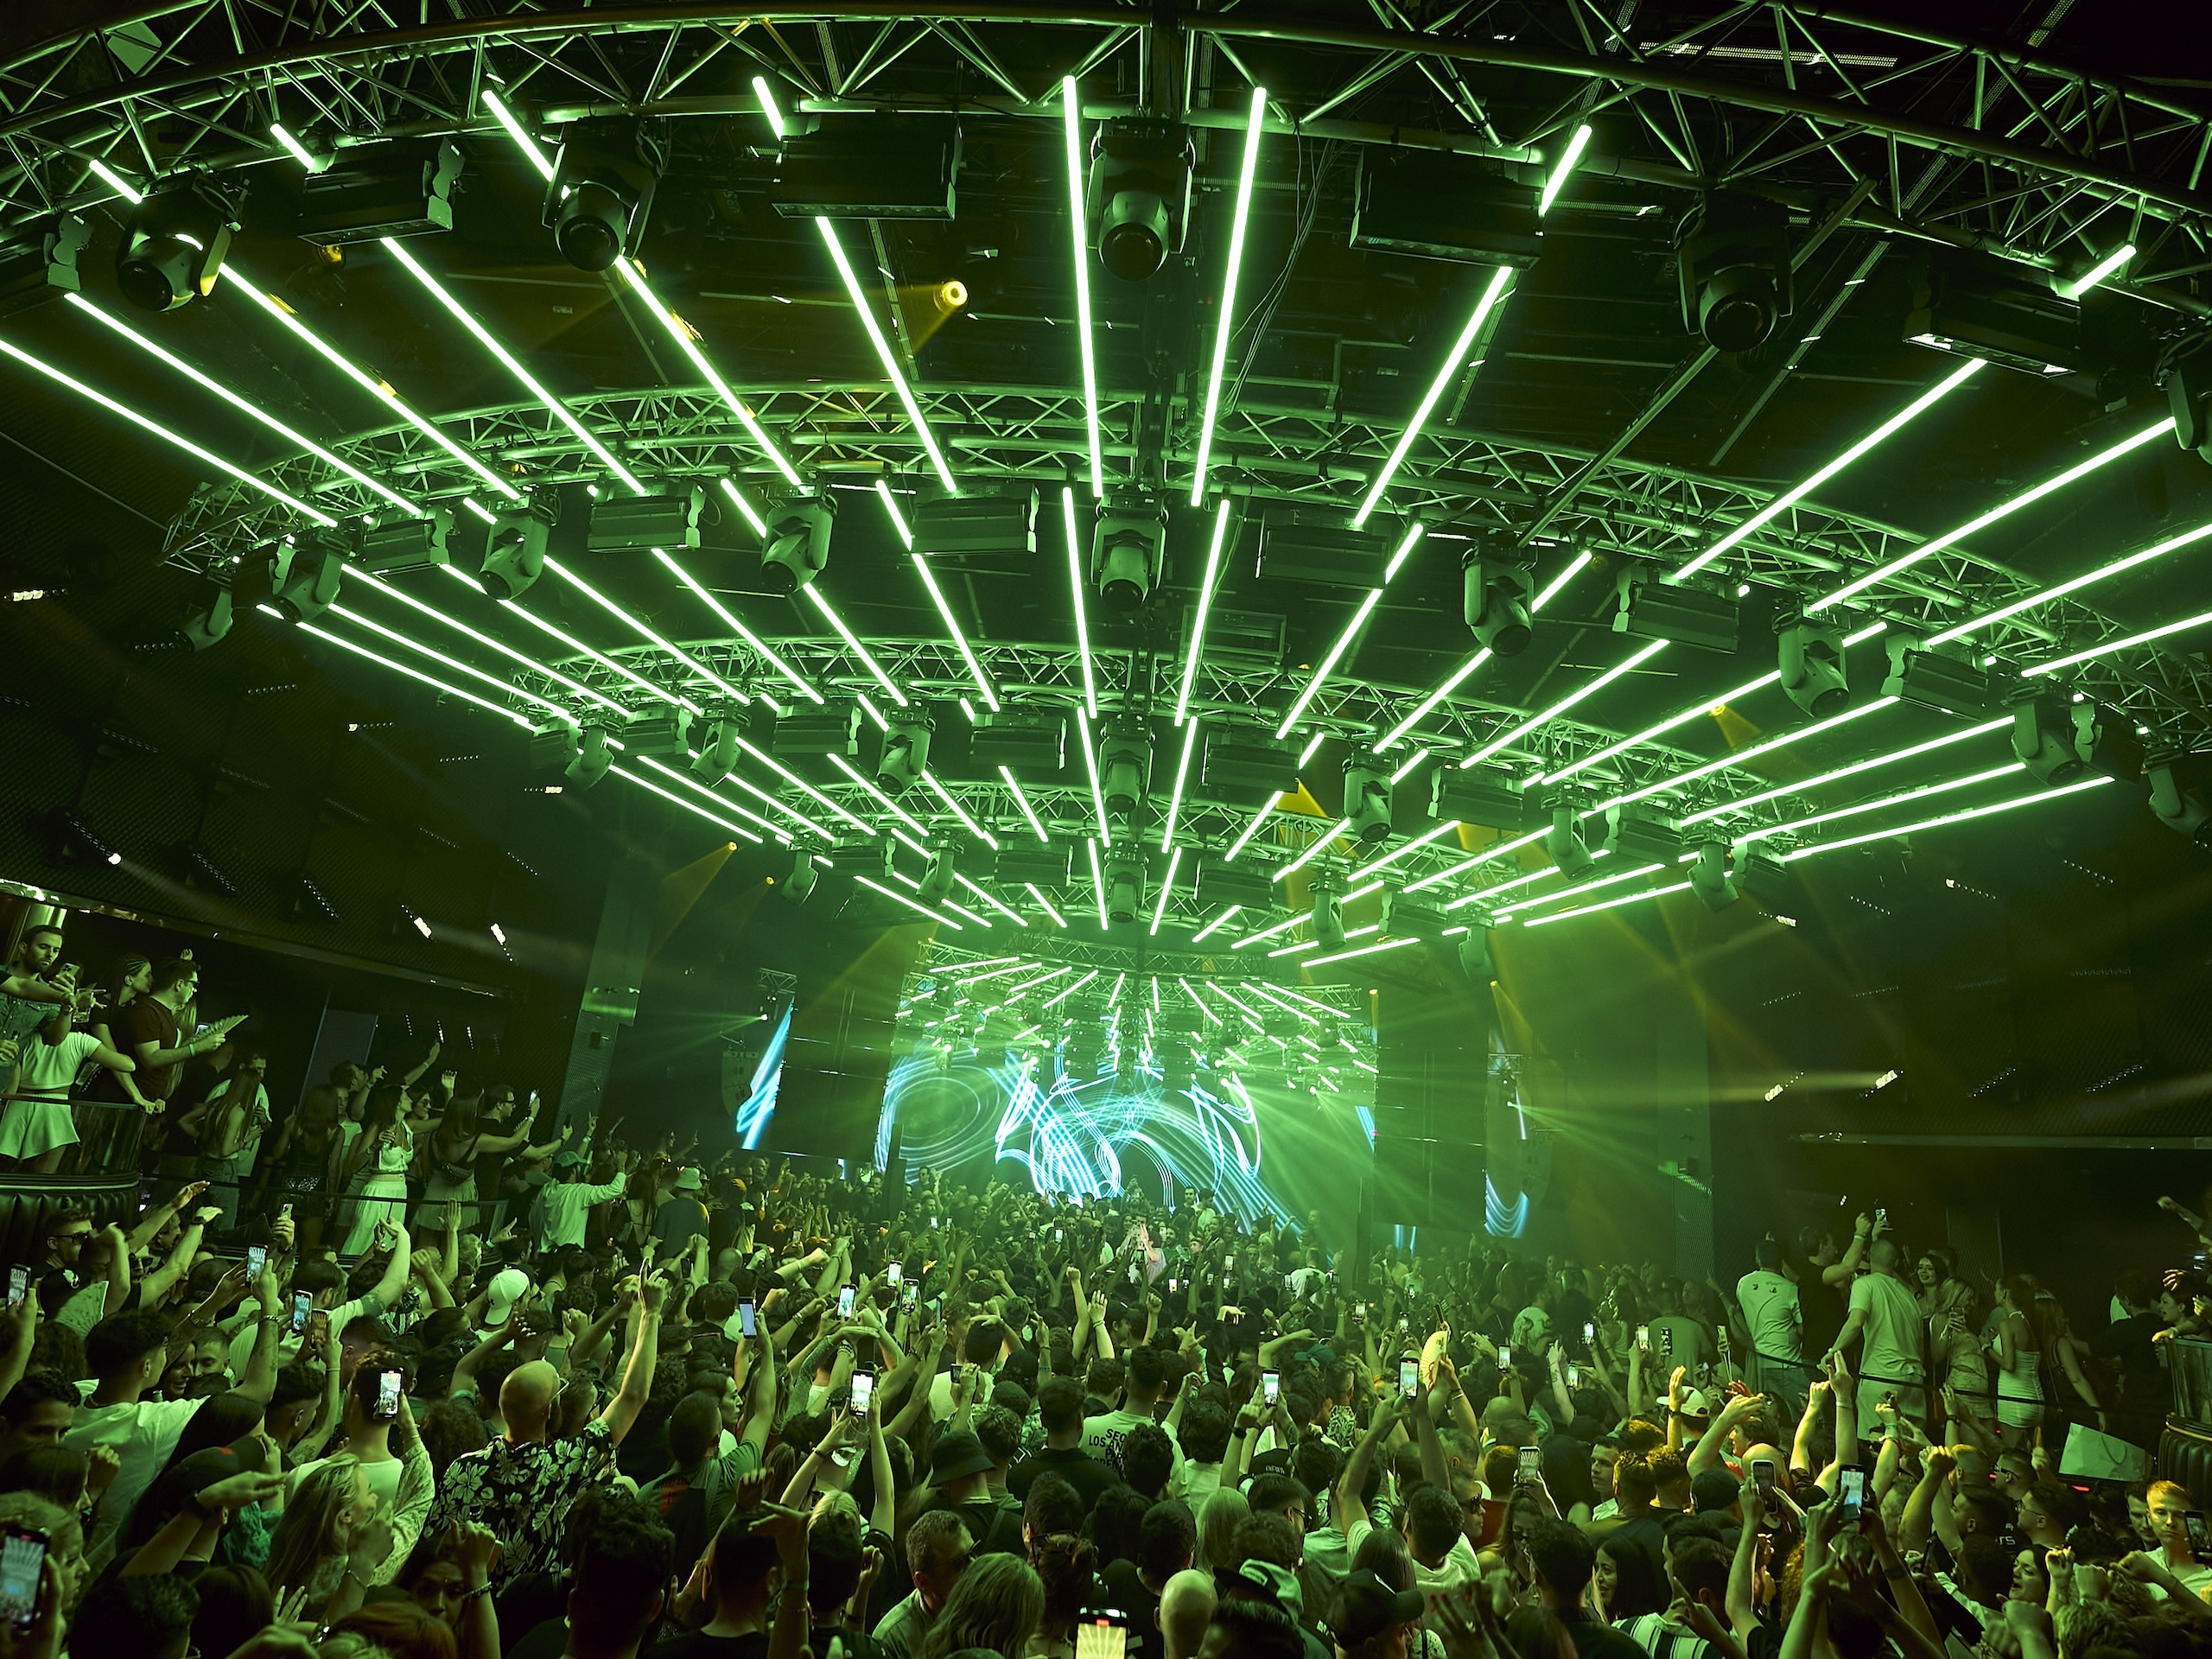 Hï Ibiza voted The World’s No. 1 Club for third consecutive year